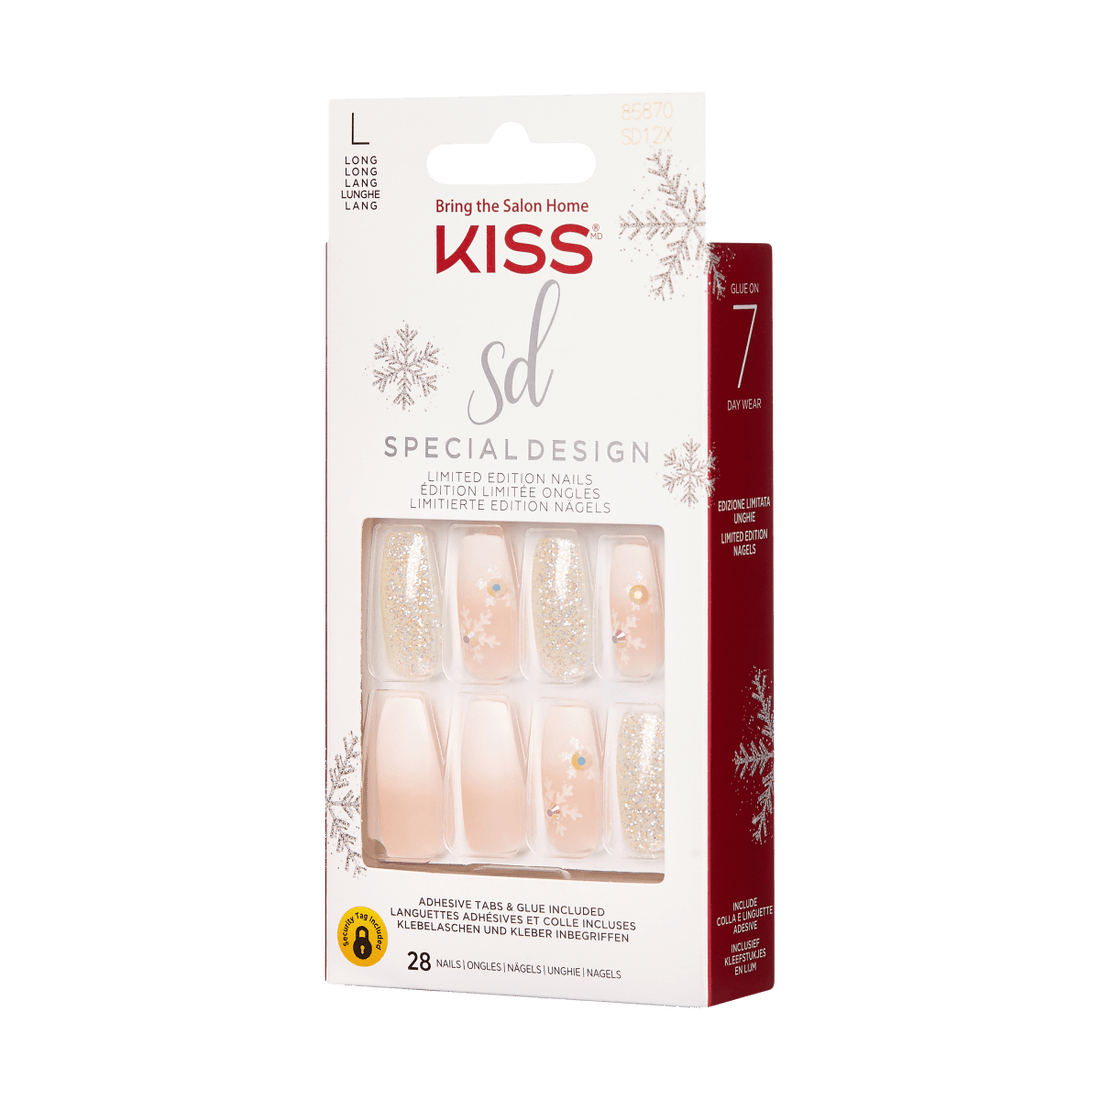 KISS Special Design Limited Edition Holiday Nails - Magic